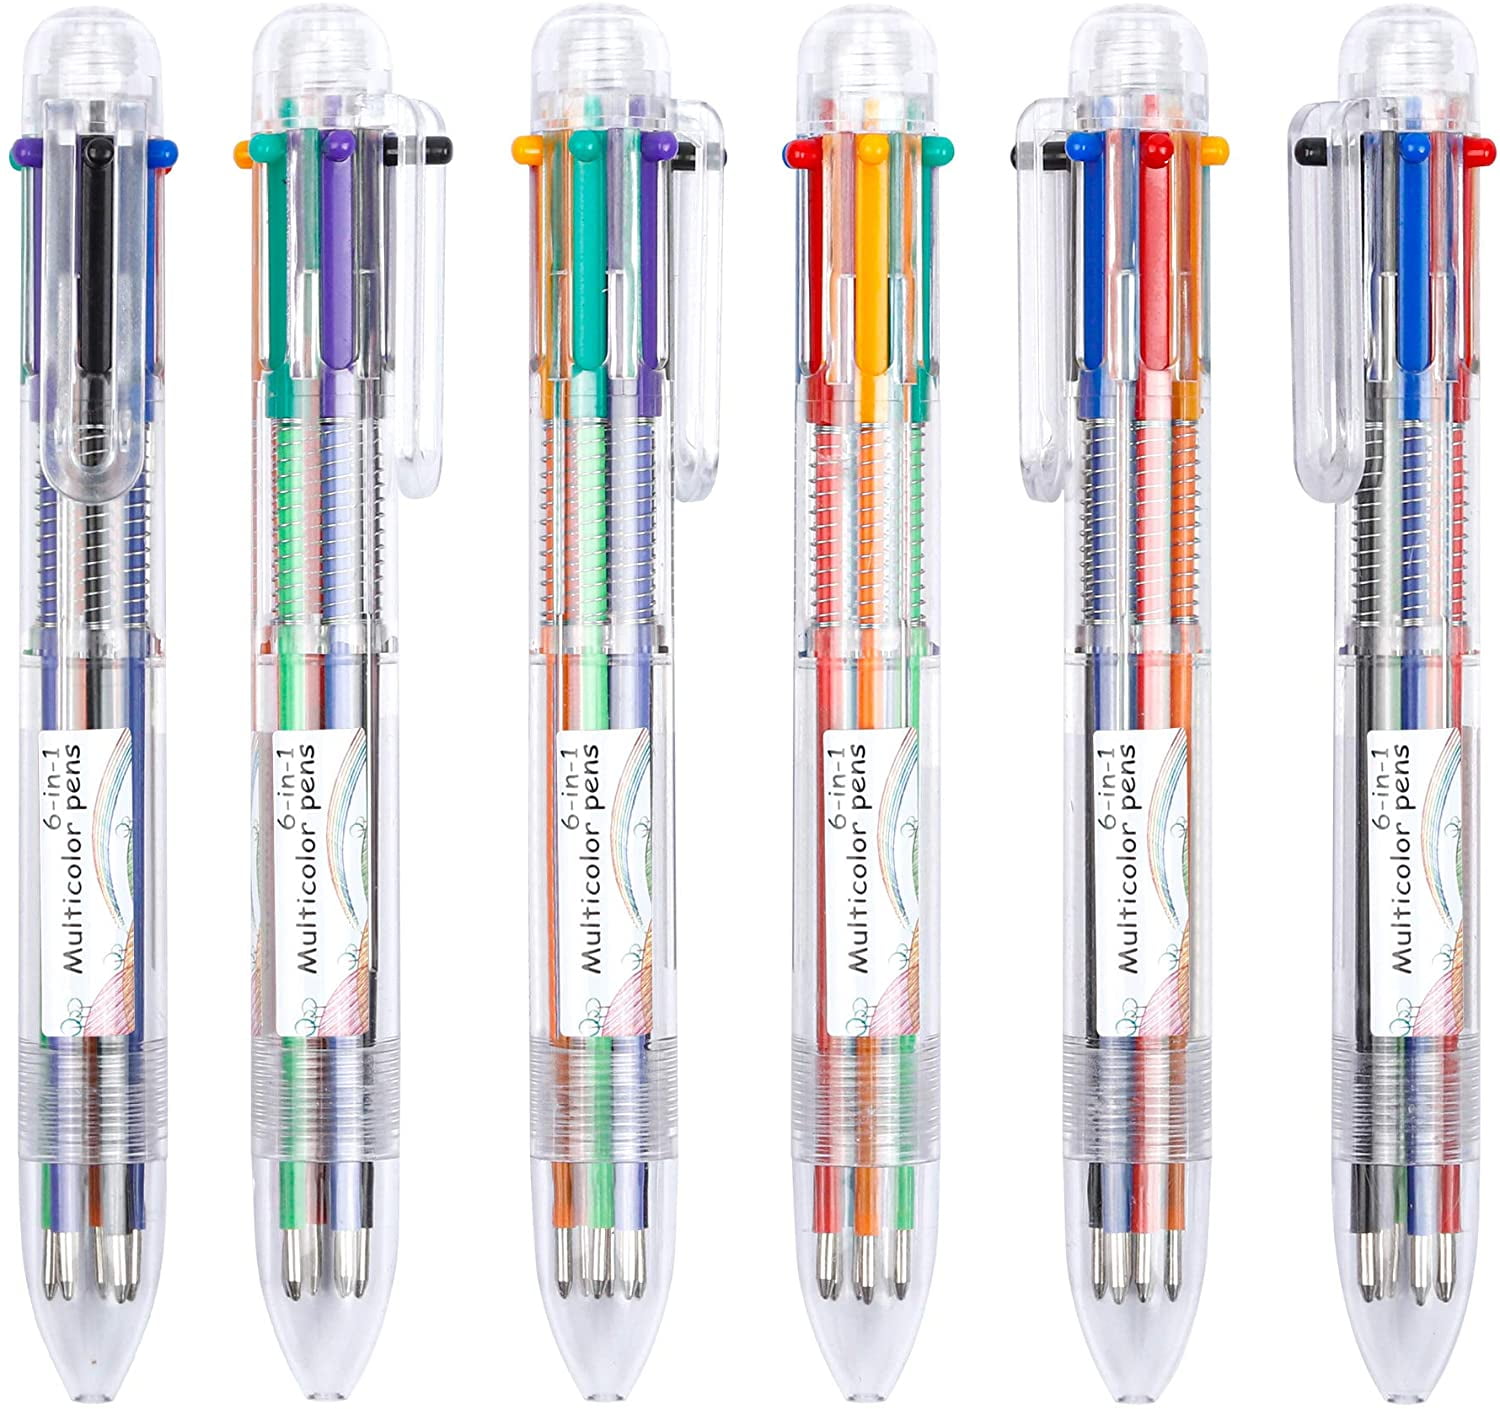 1Pcs Multi-color 6 in 1 Color Ballpoint Pen Ball Point Pens Kids School Supply 